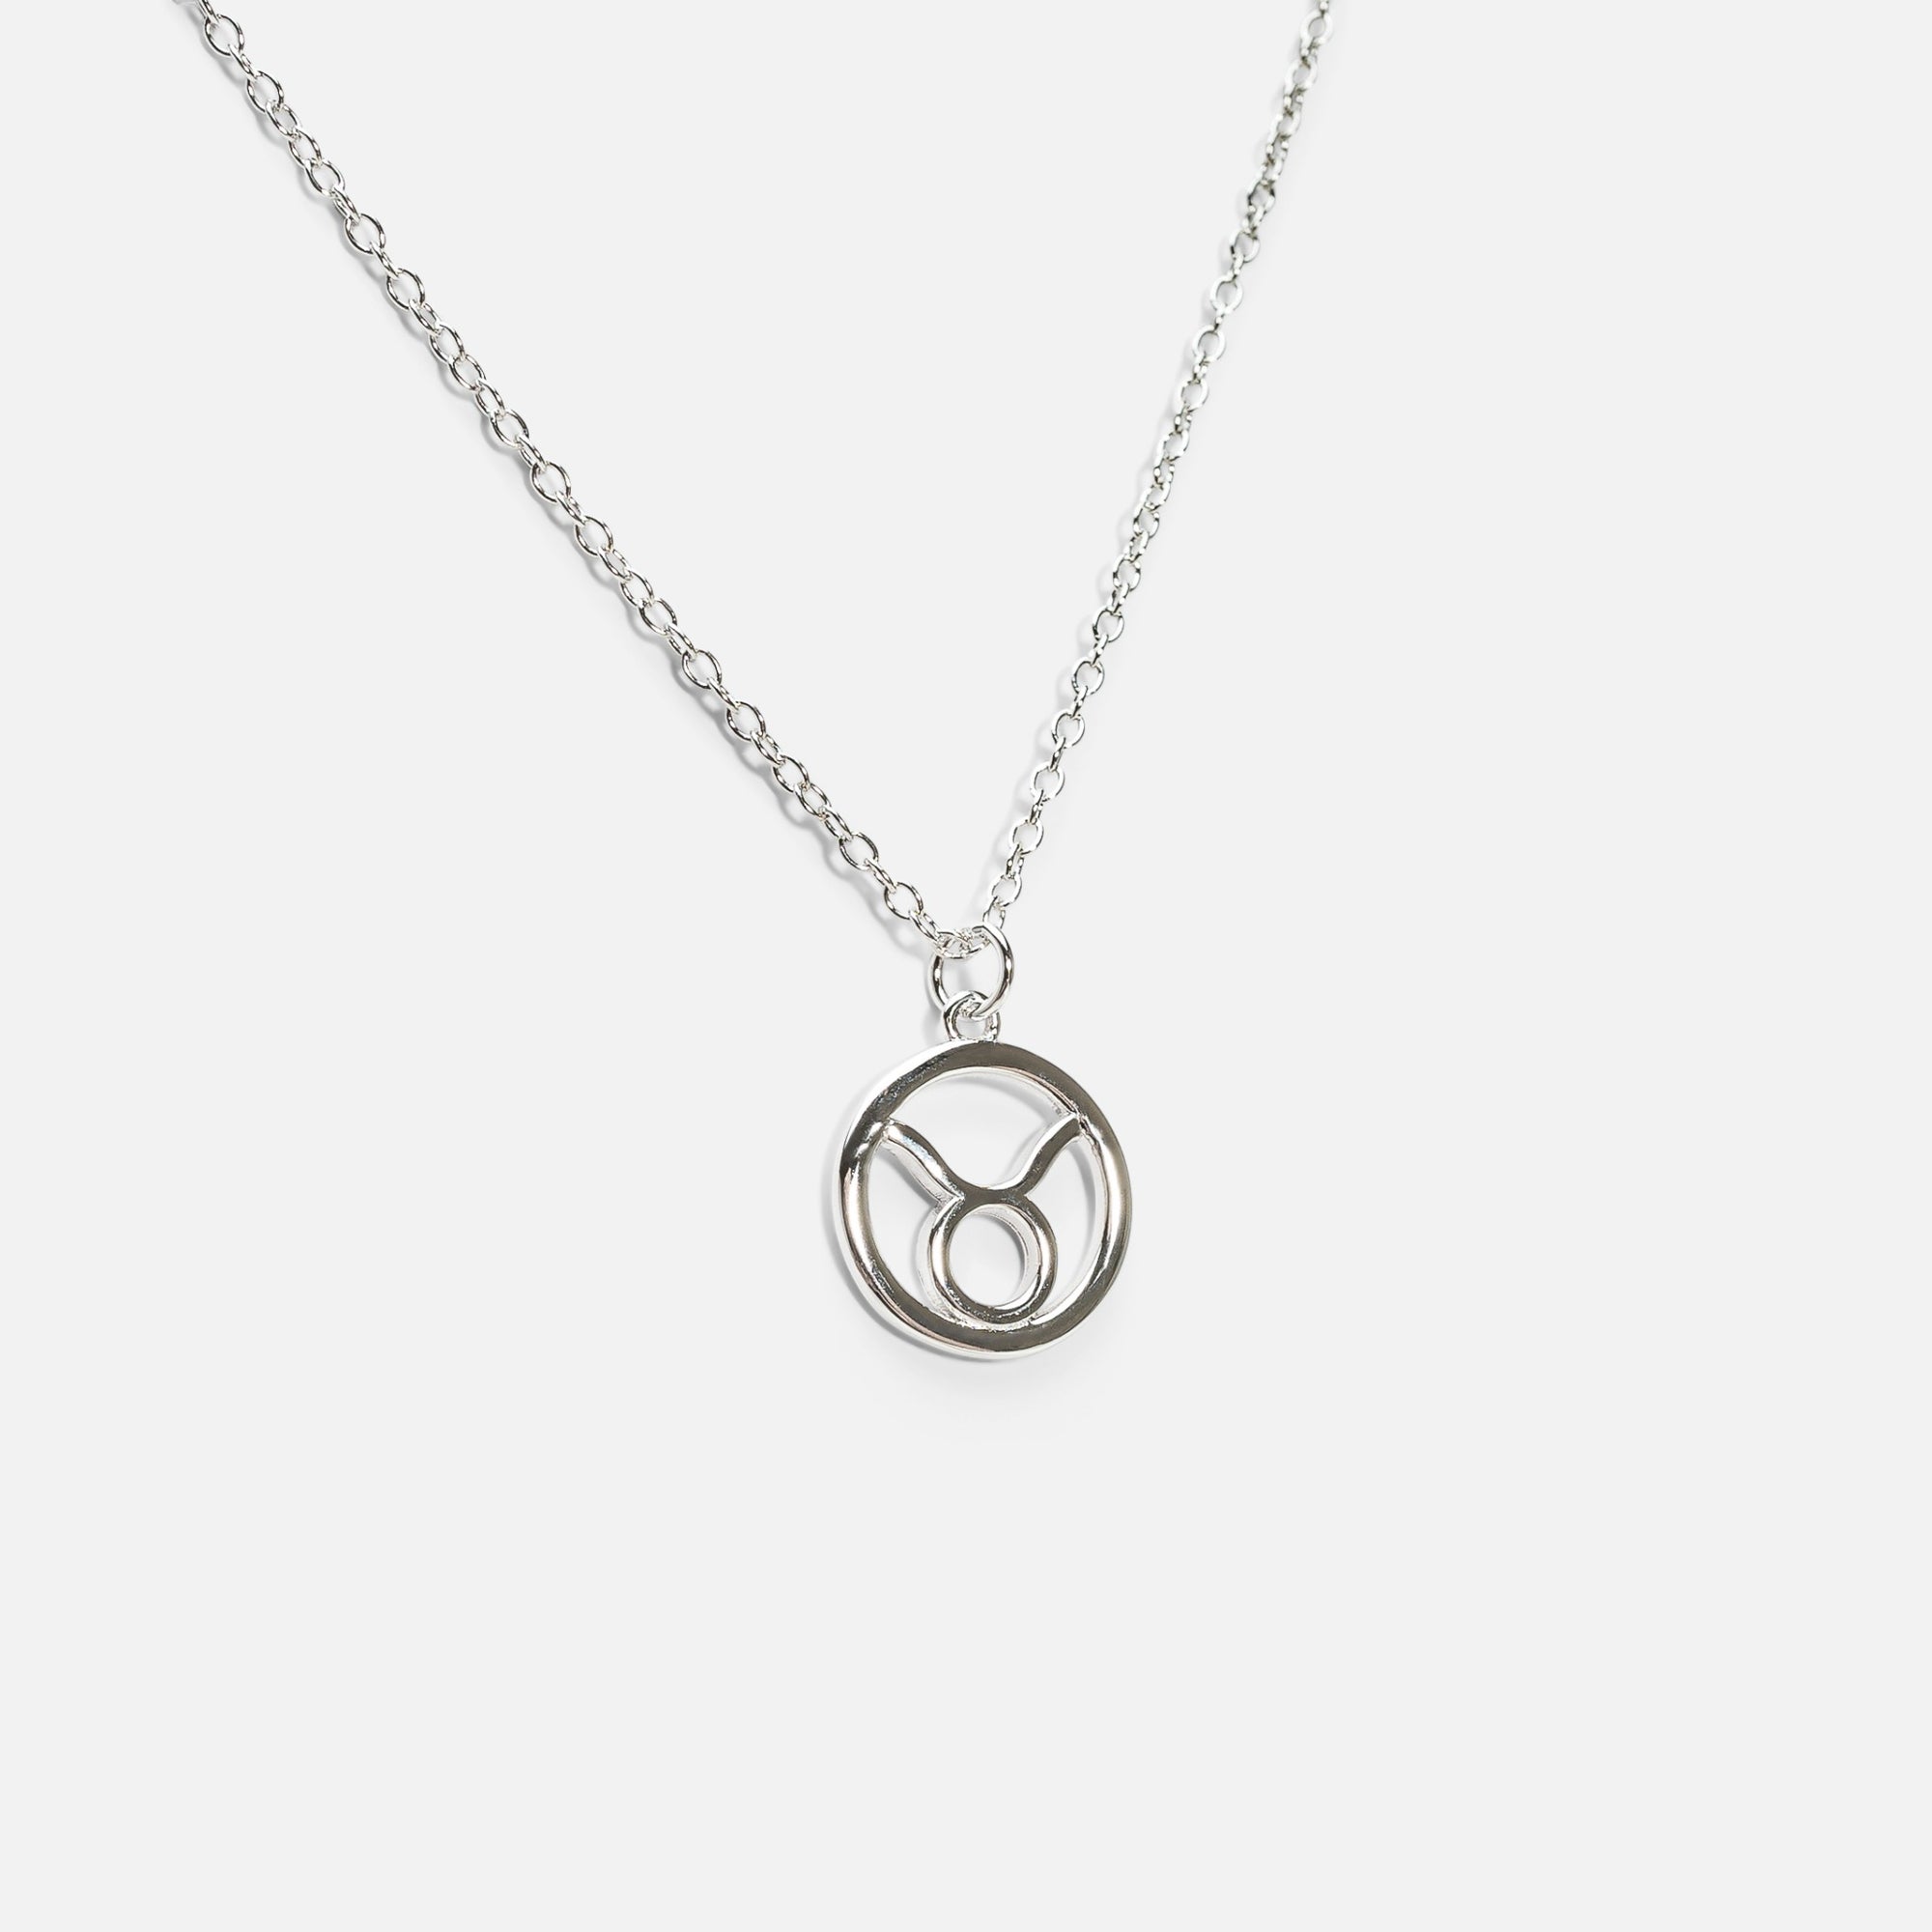 Sterling silver pendant with taurus zodiac sign